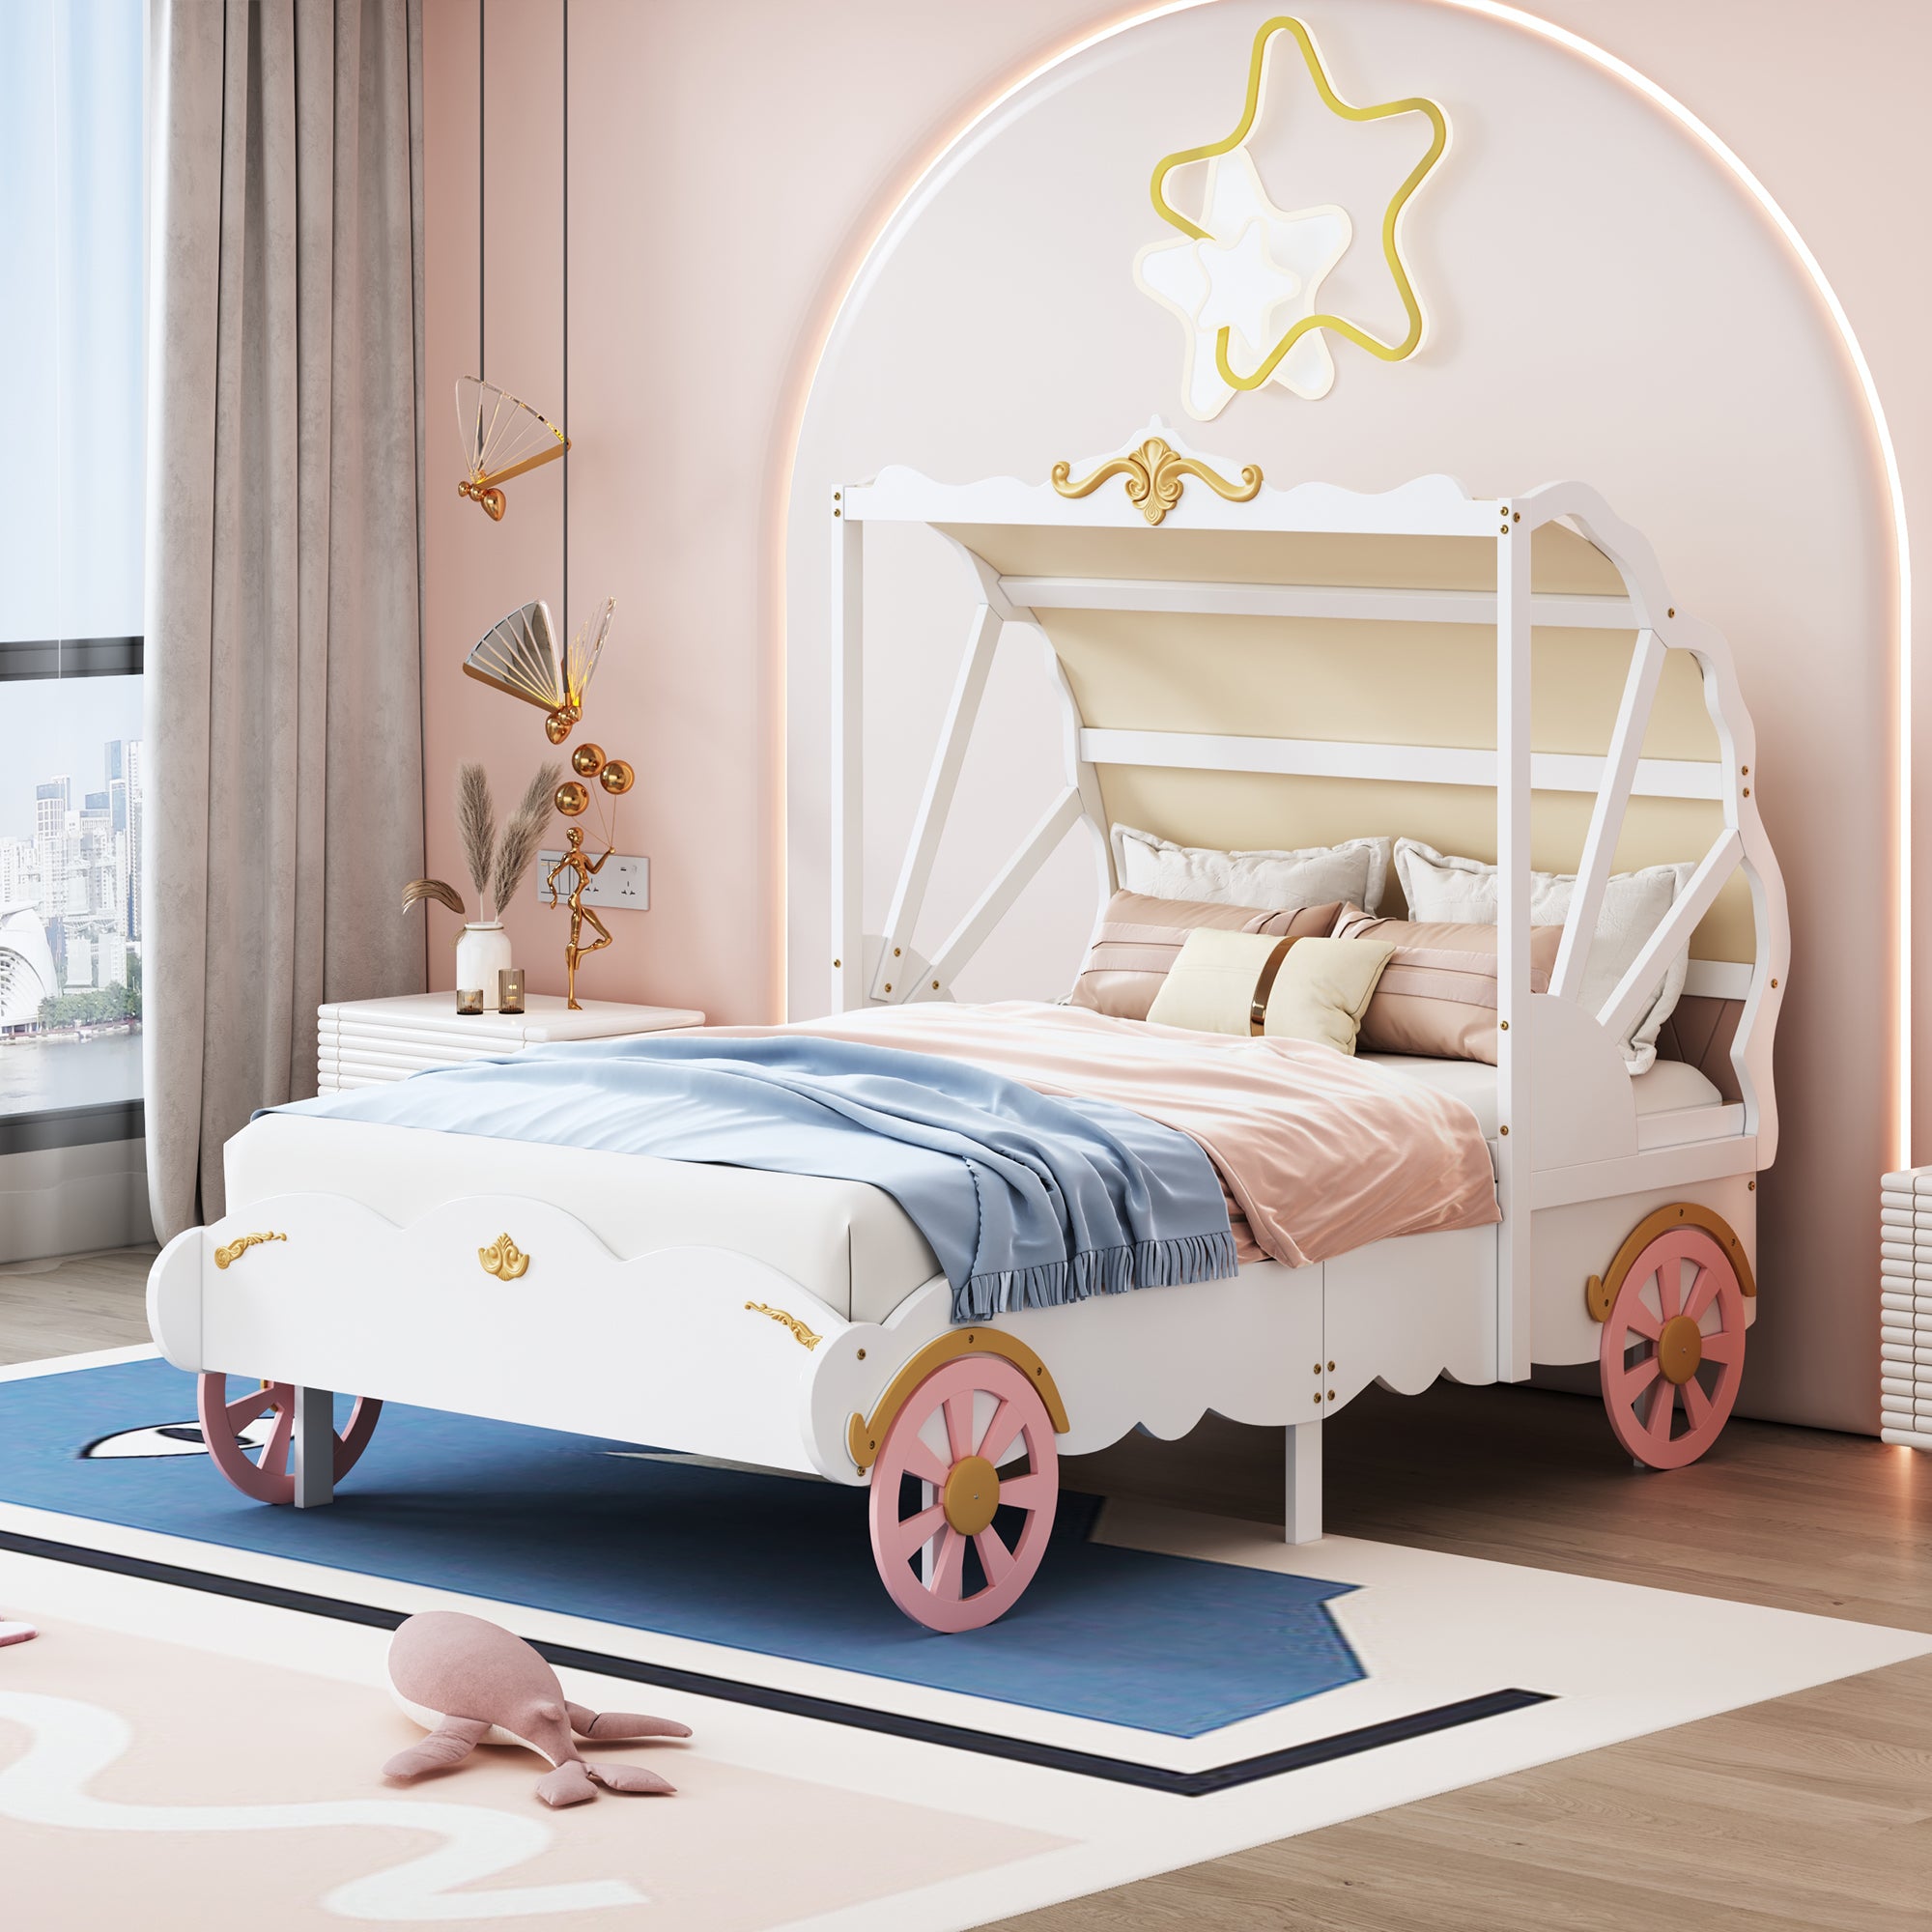 Bellemave Wood Platform Car Bed with 3D Carving Pattern,Princess Carriage Bed with Canopy